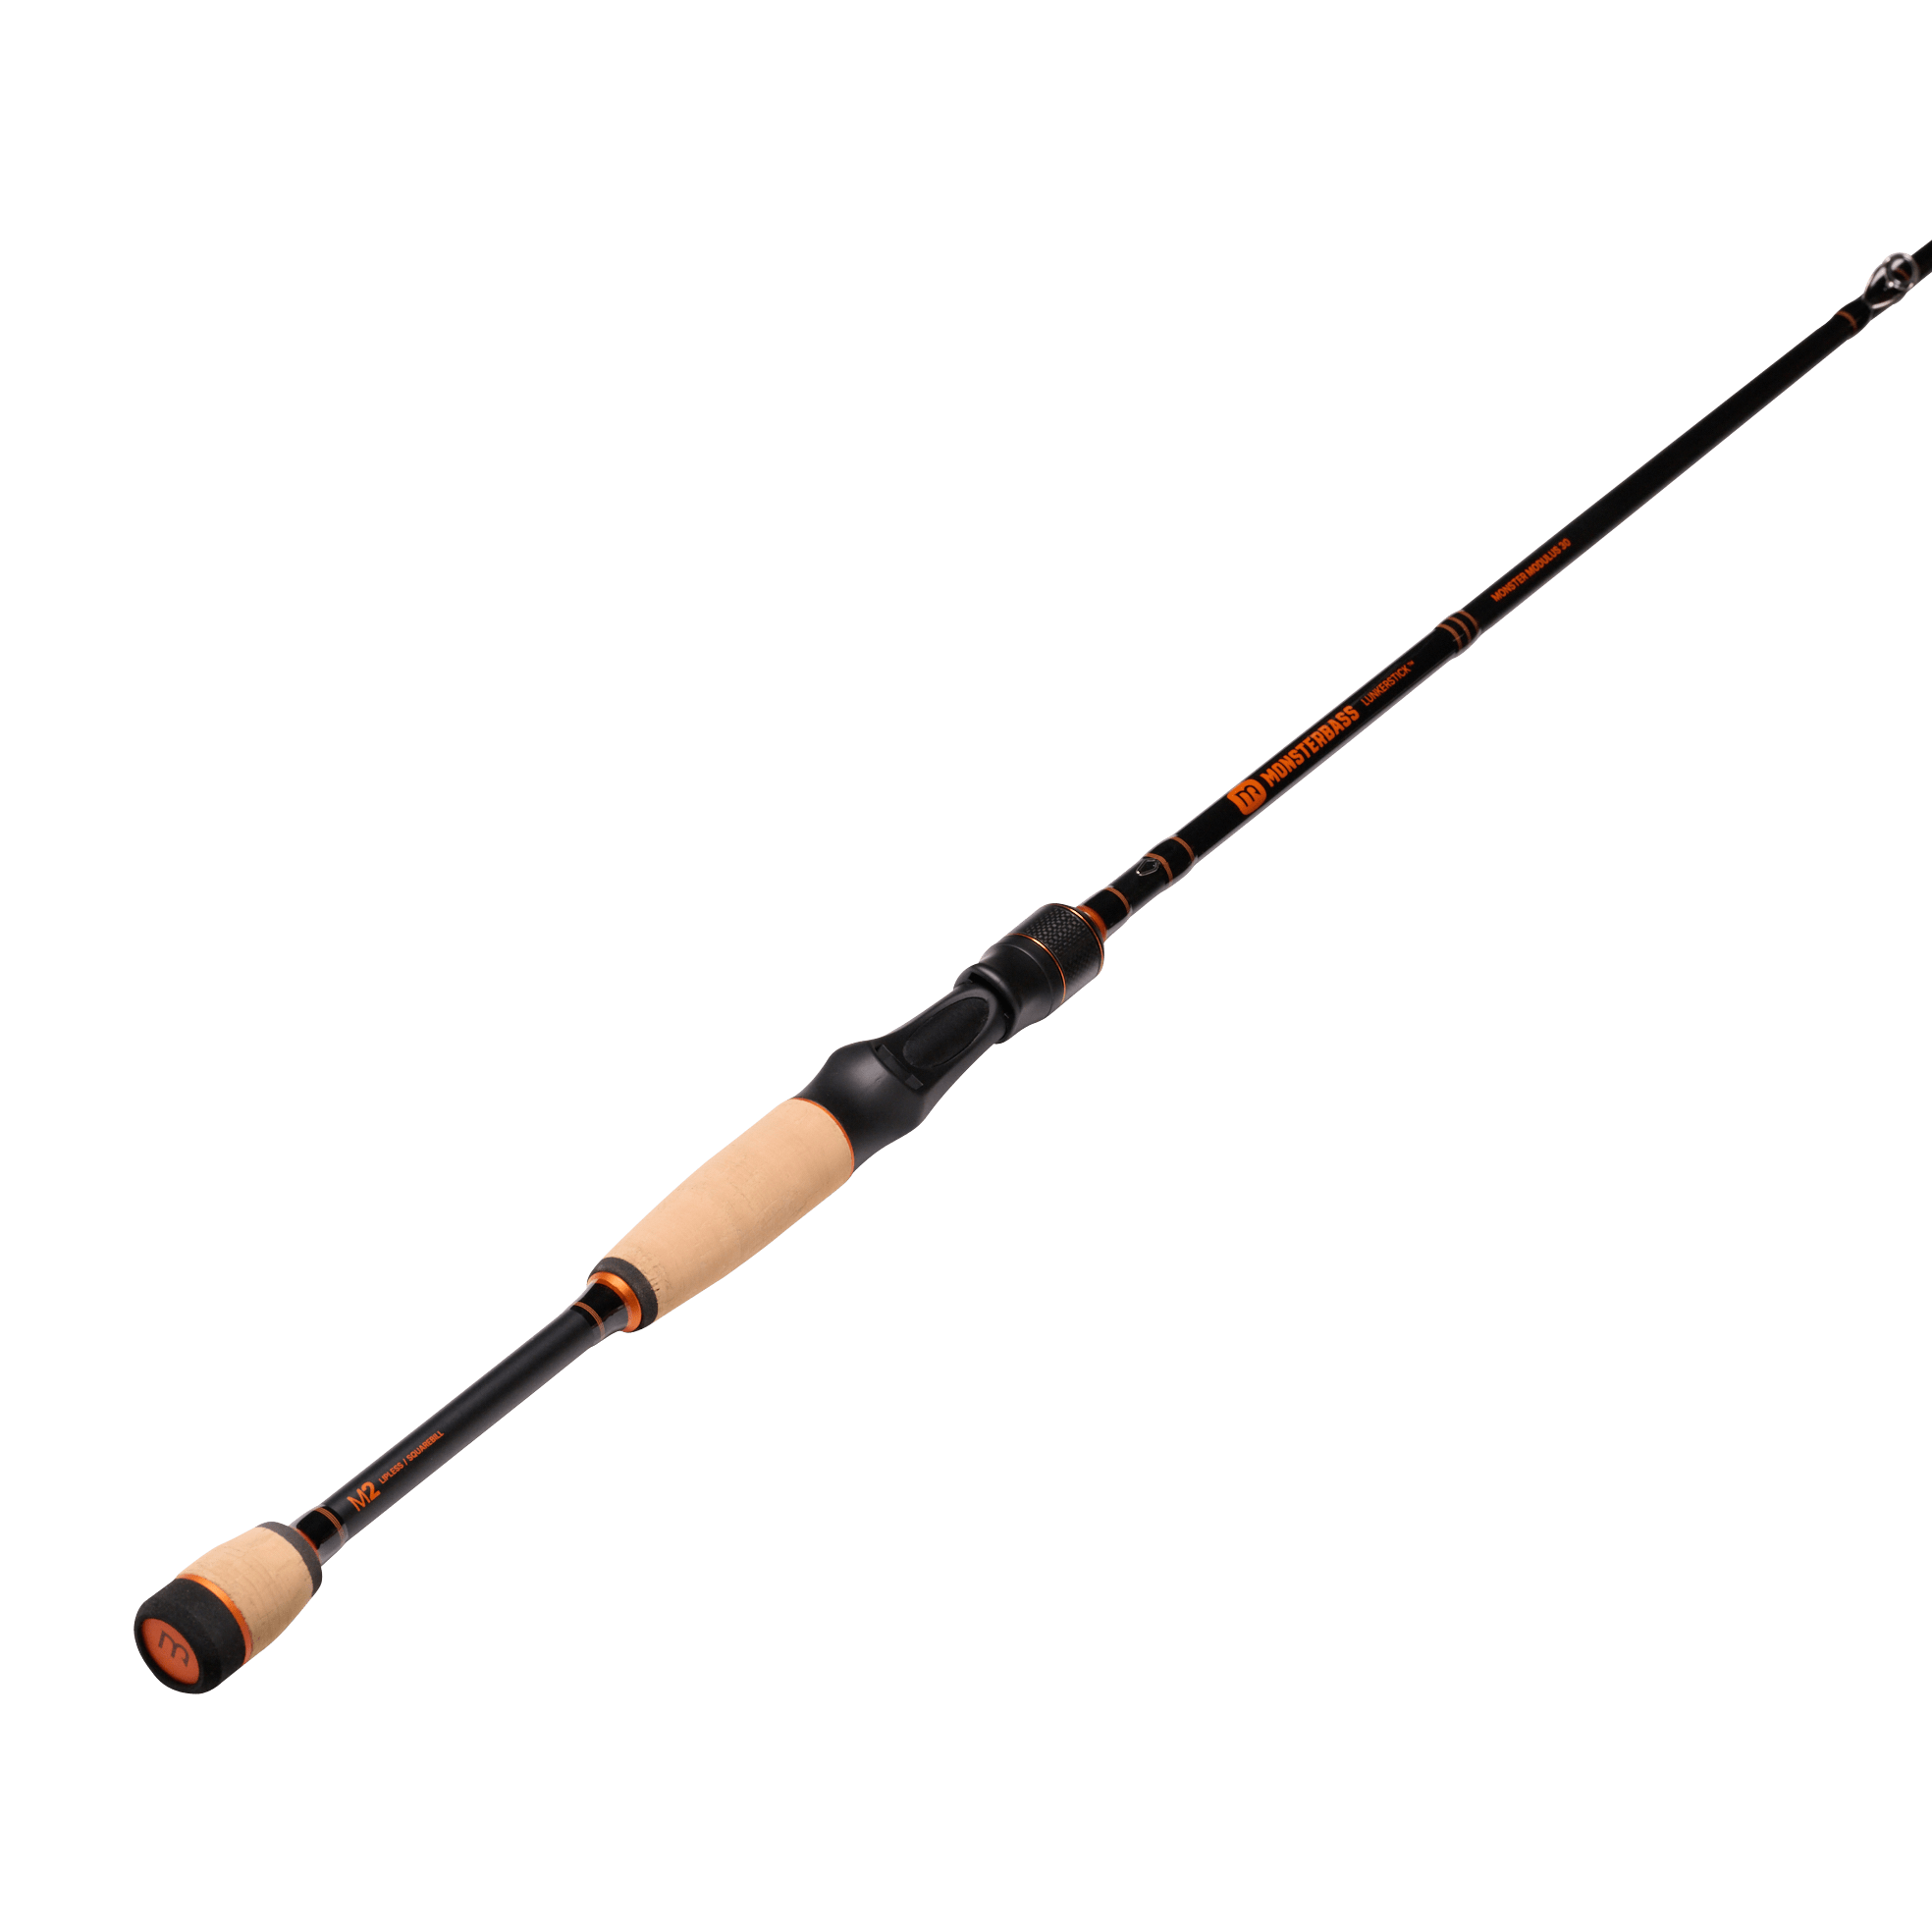 Shop Ultra Light Spinning Fishing Rod with great discounts and